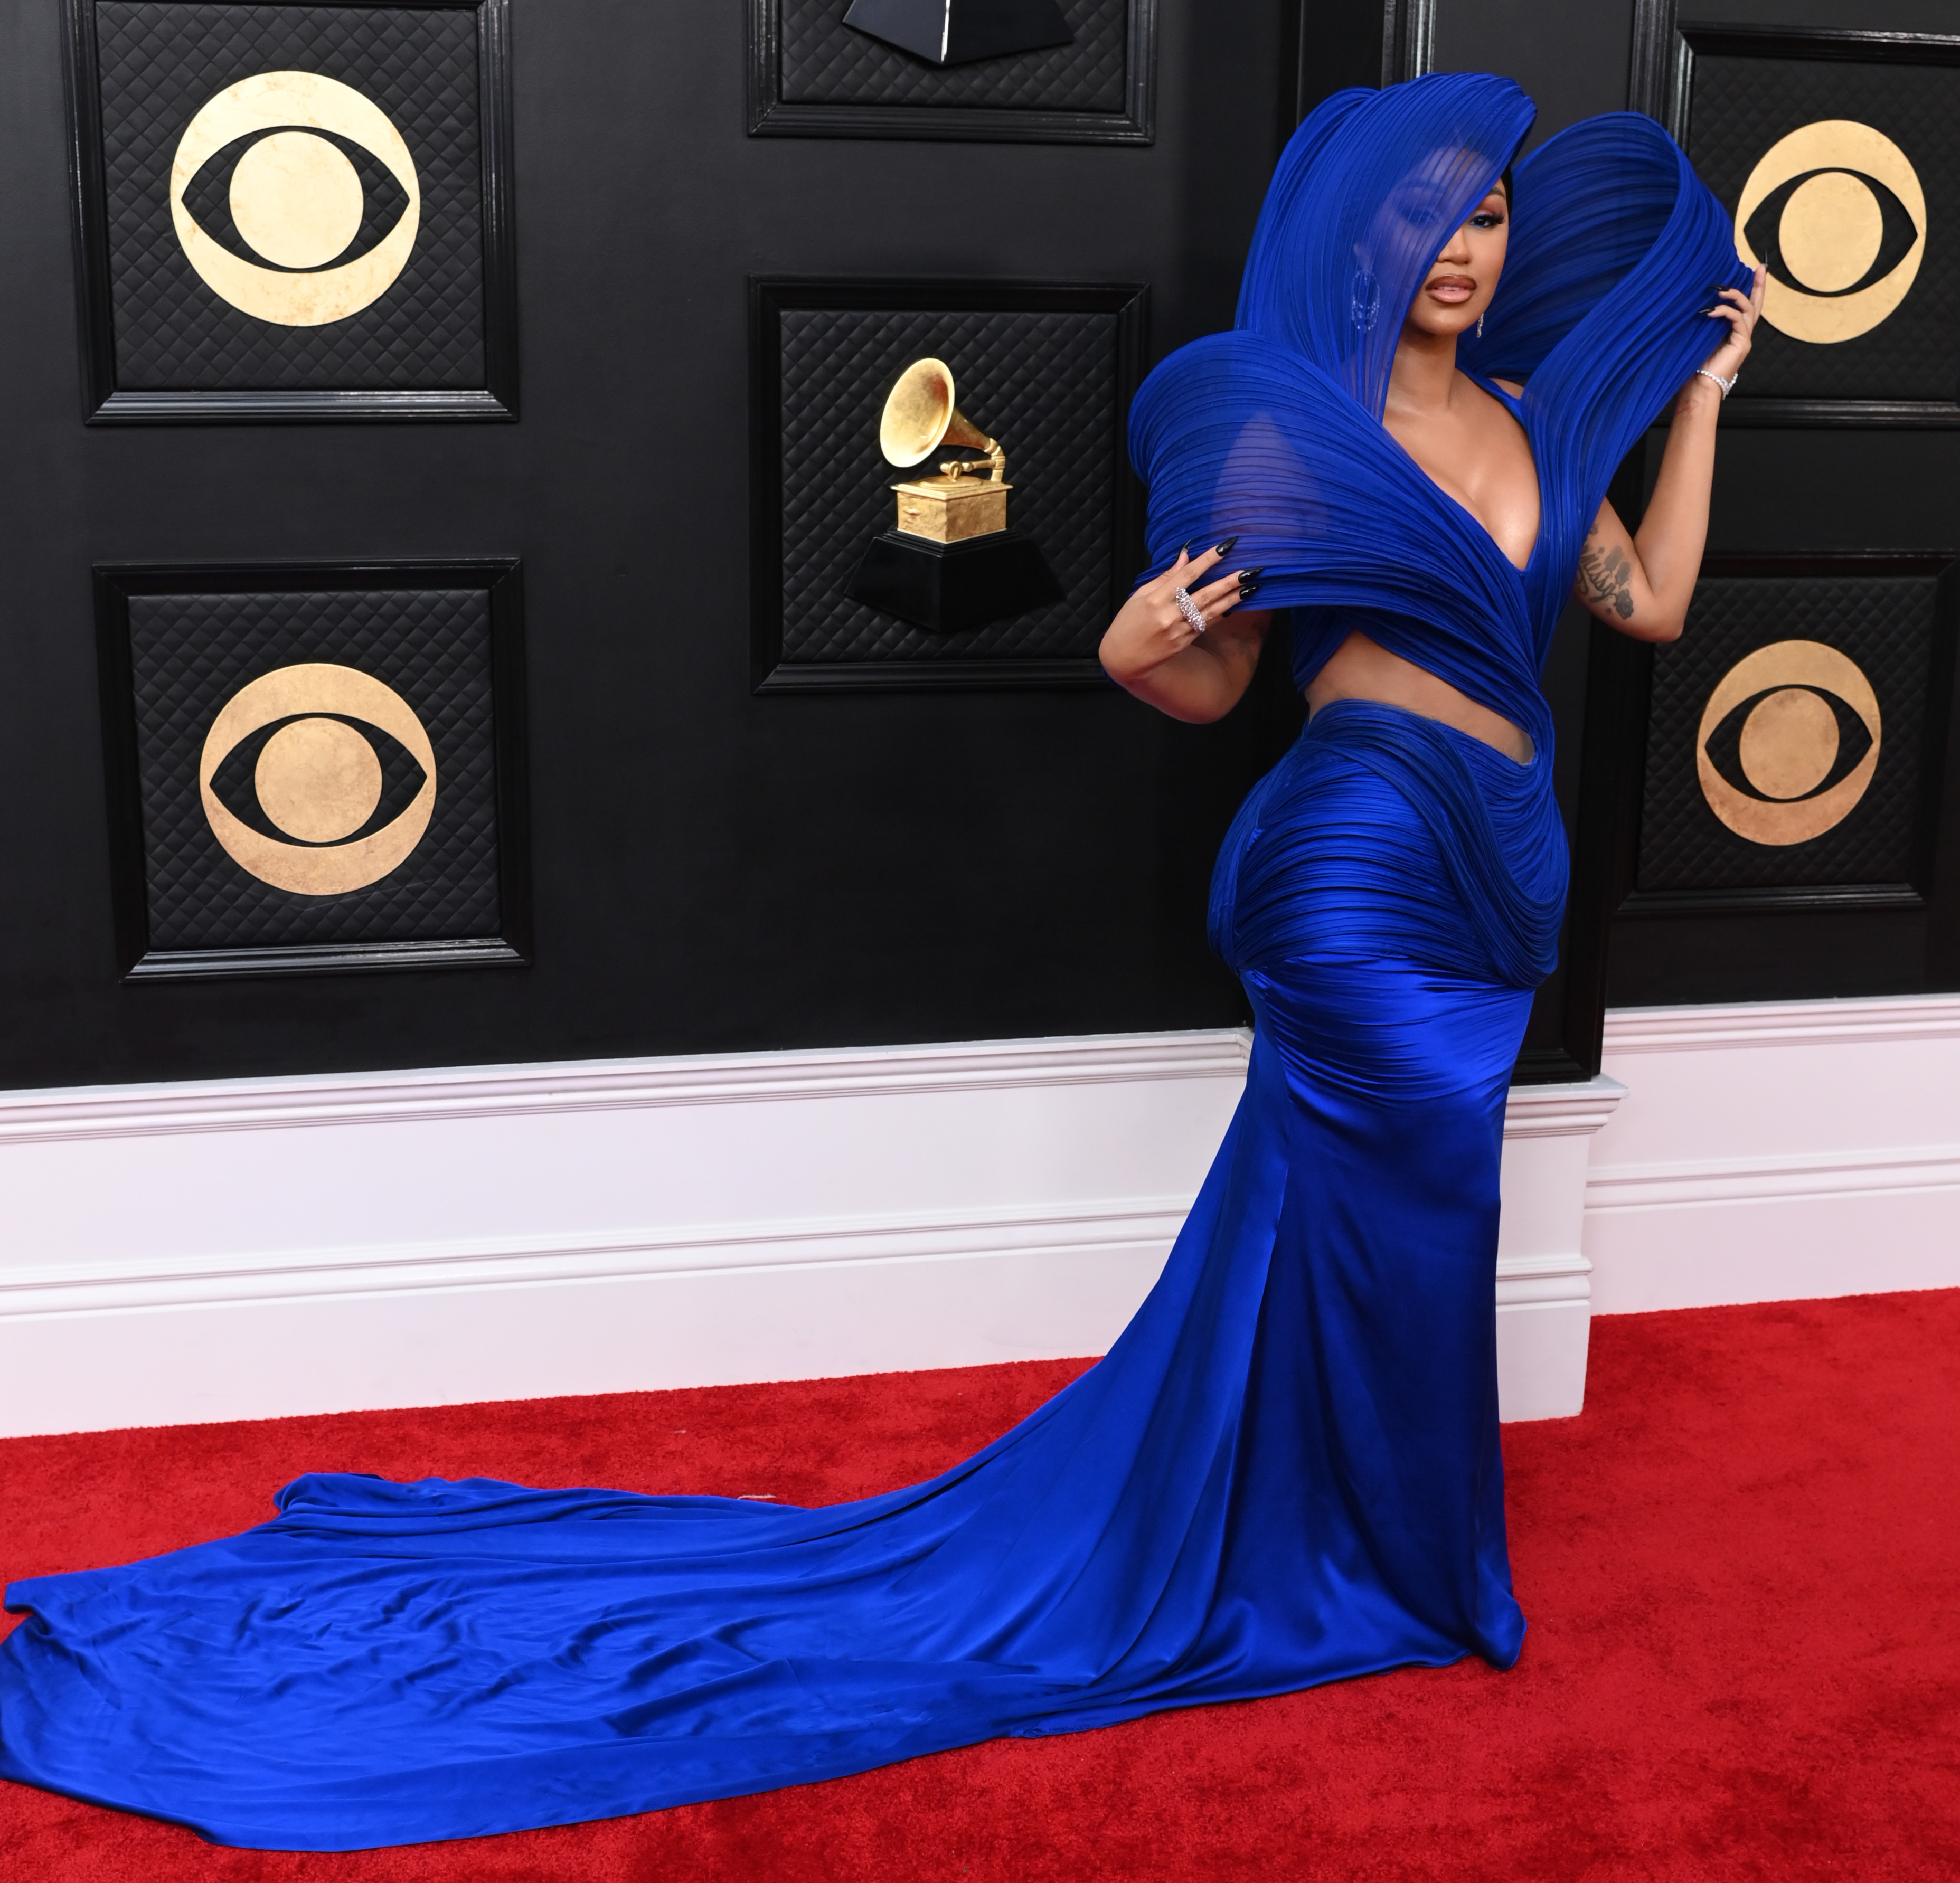 Grammys 2023: the Most Daring Red-Carpet Outfits Celebrities Wore